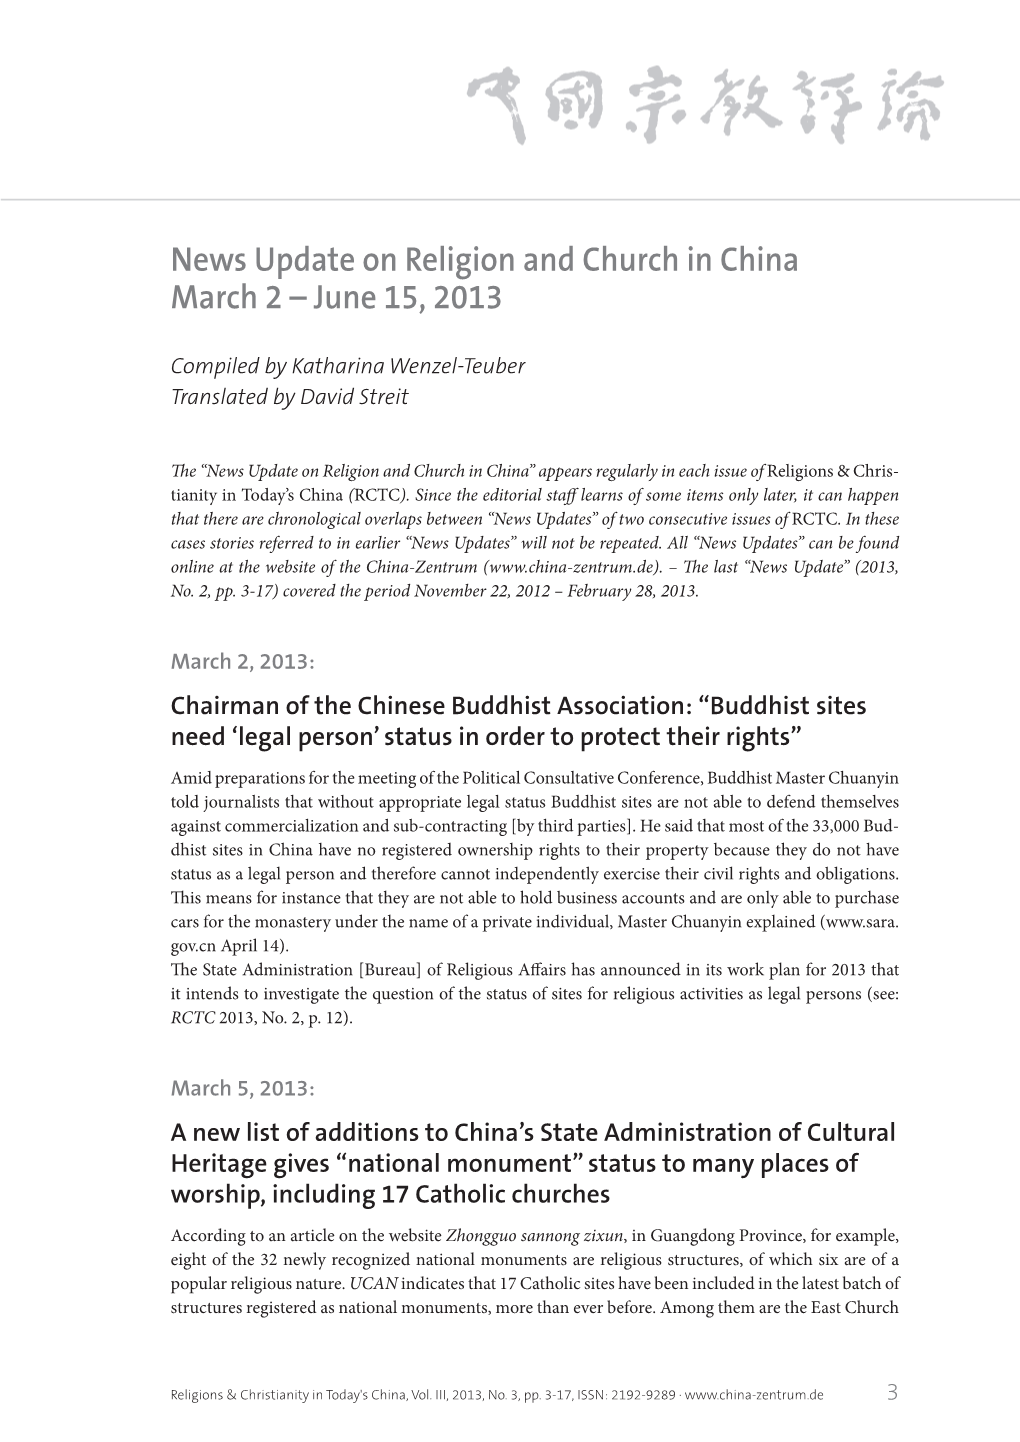 News Update on Religion and Church in China March 2 – June 15, 2013